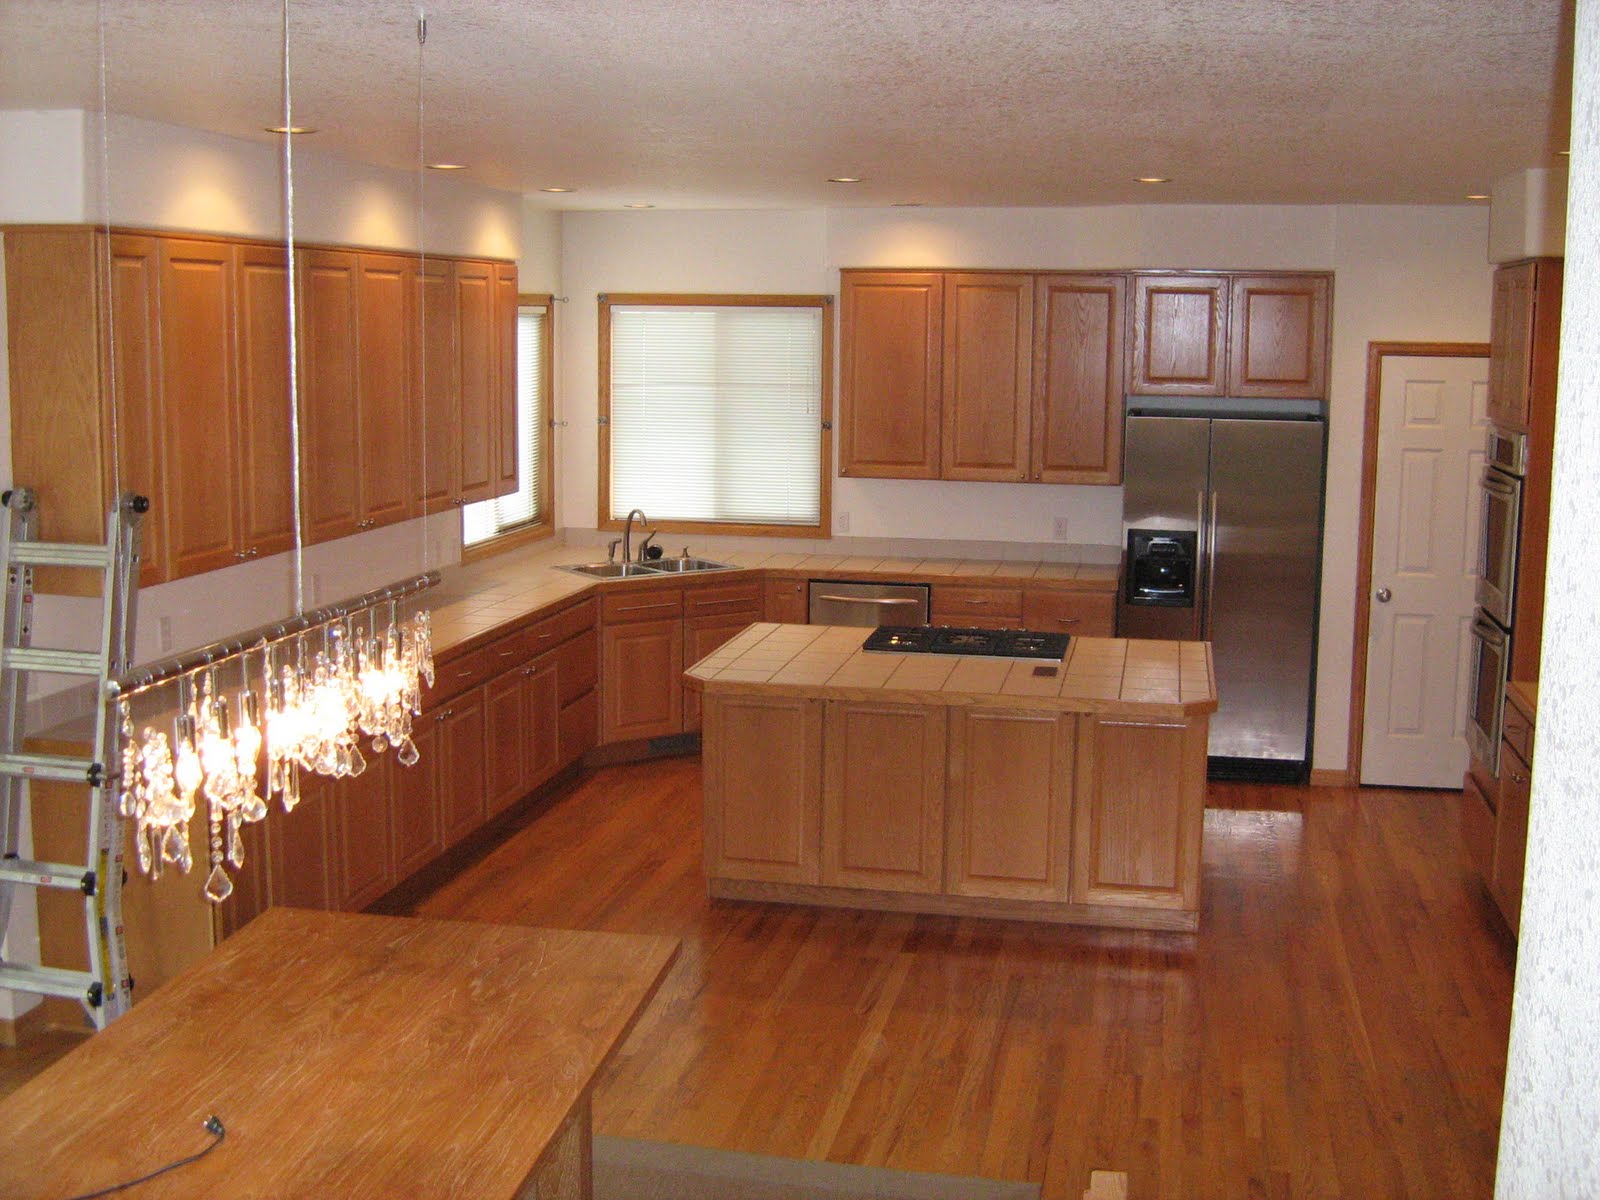 Kitchens with Oak Cabinets